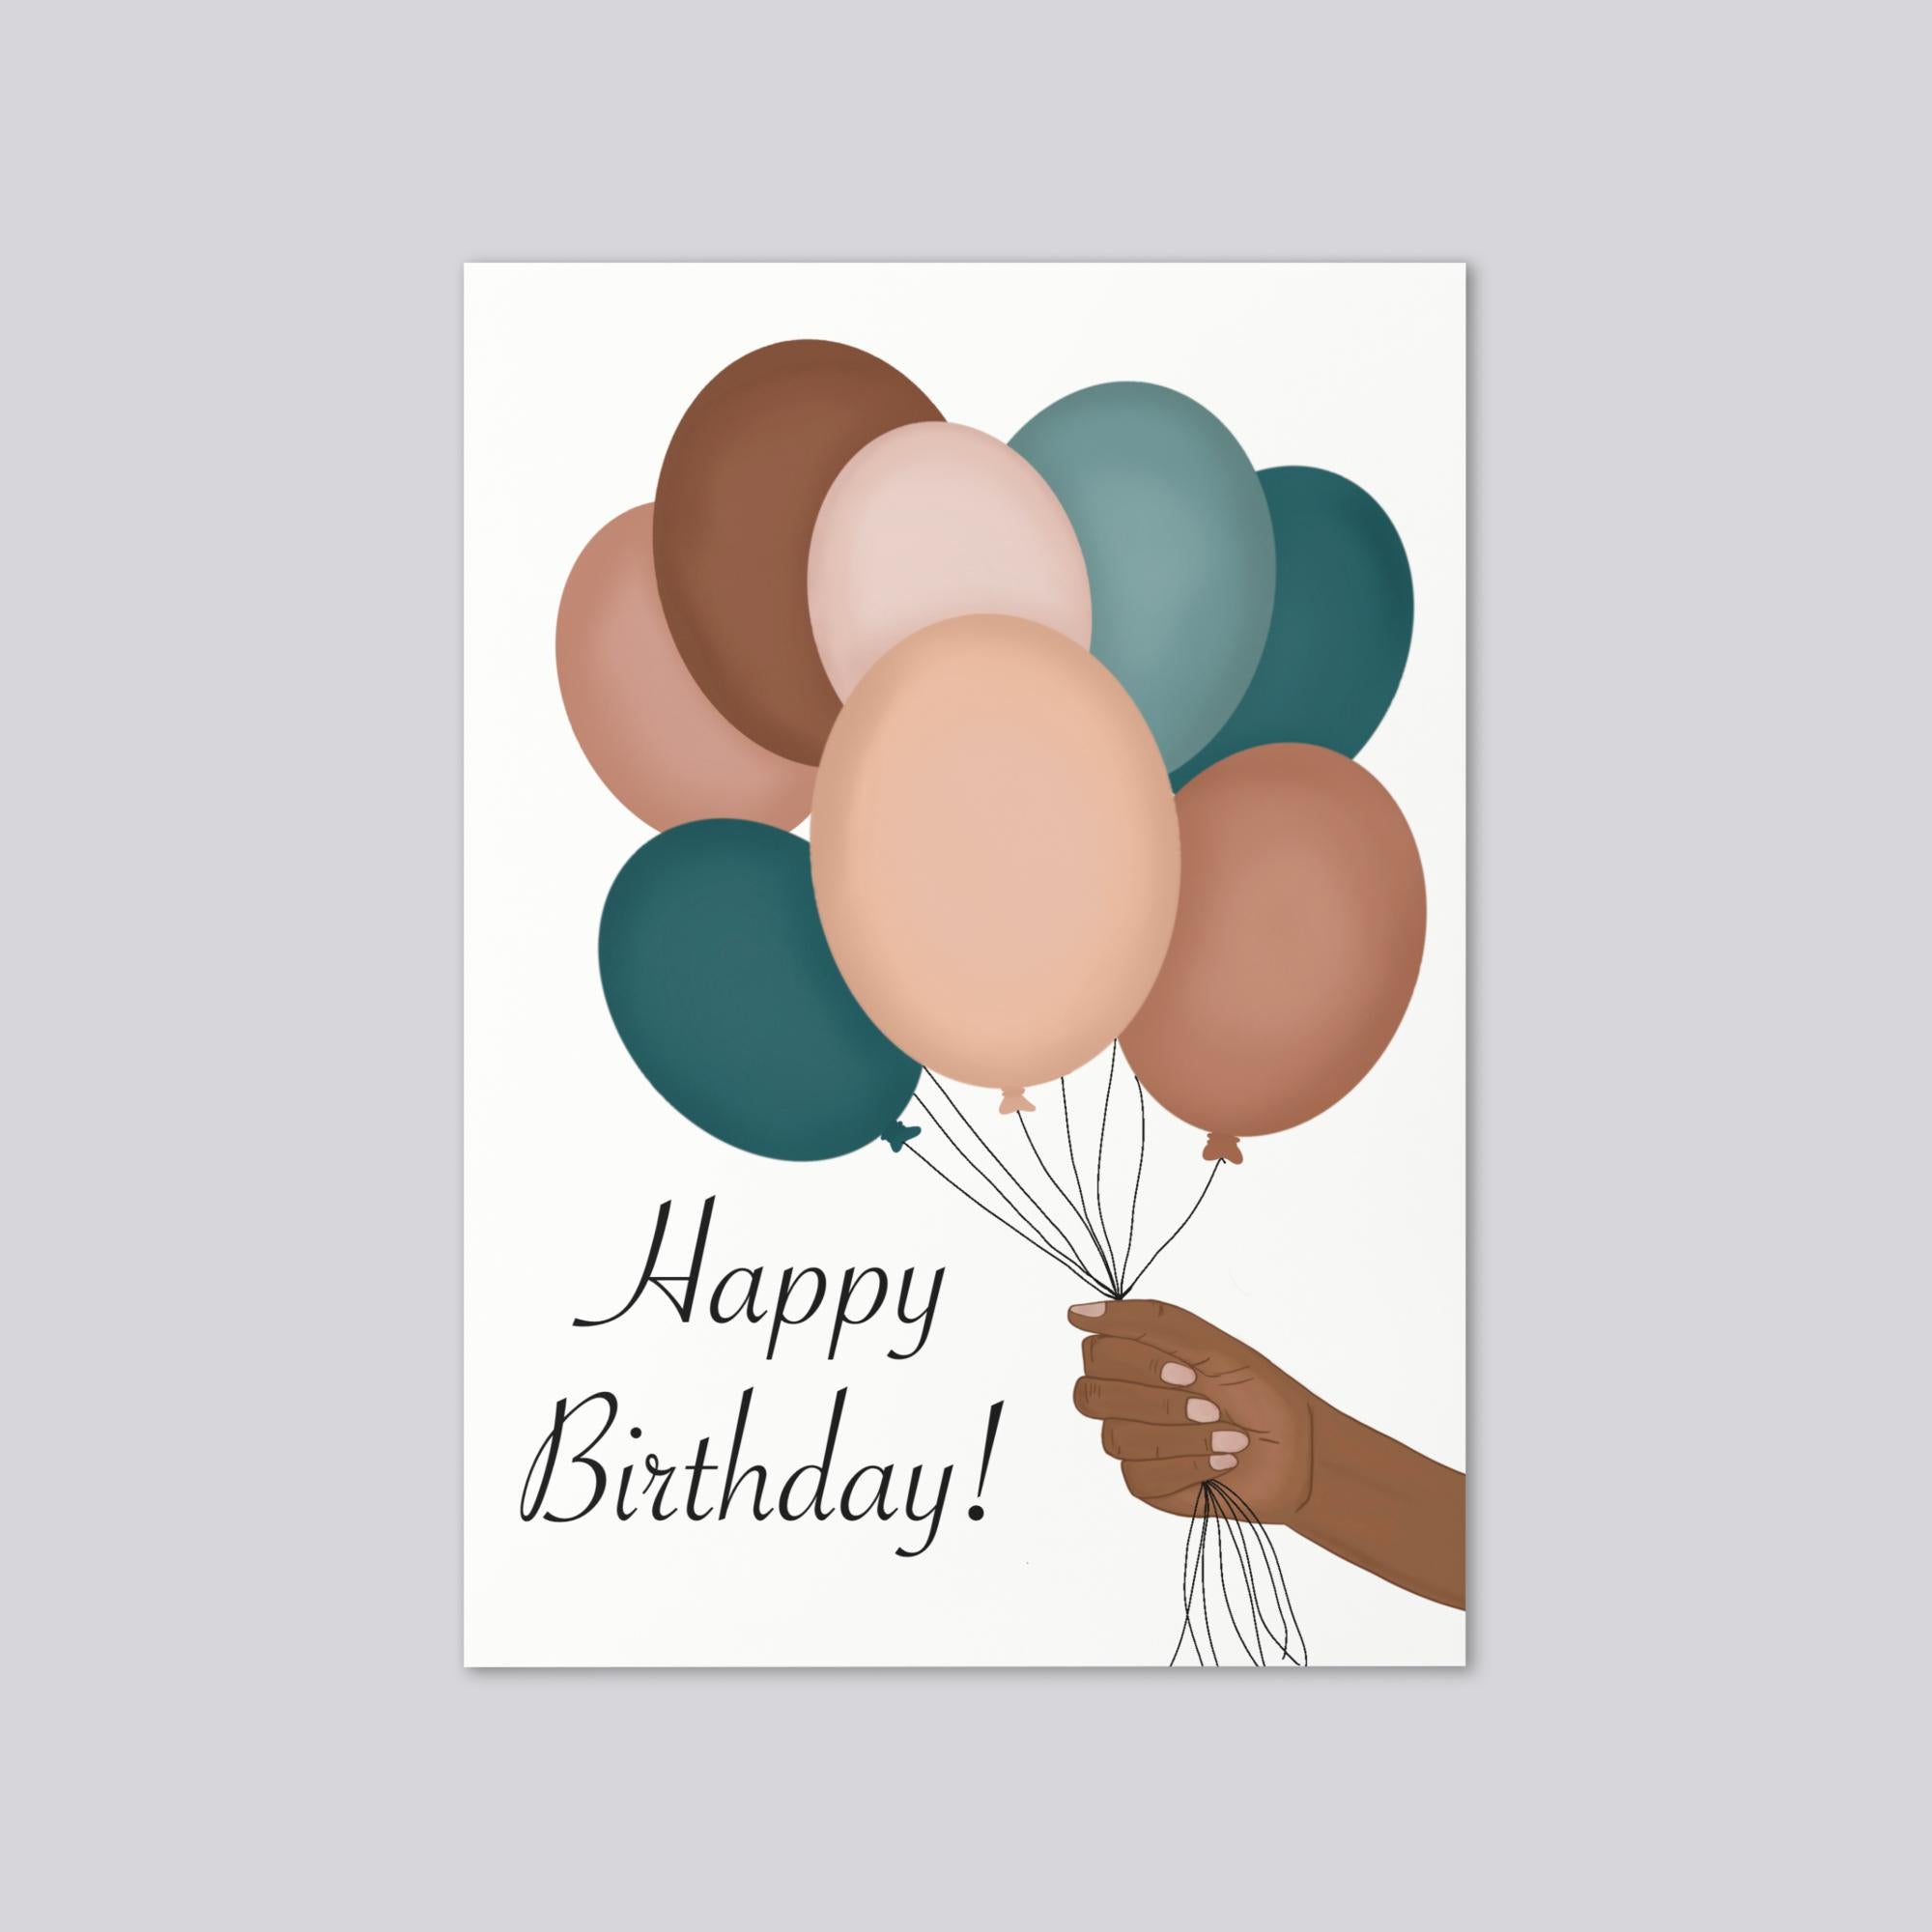 Blessings And Balloons! Birthday Greeting Card